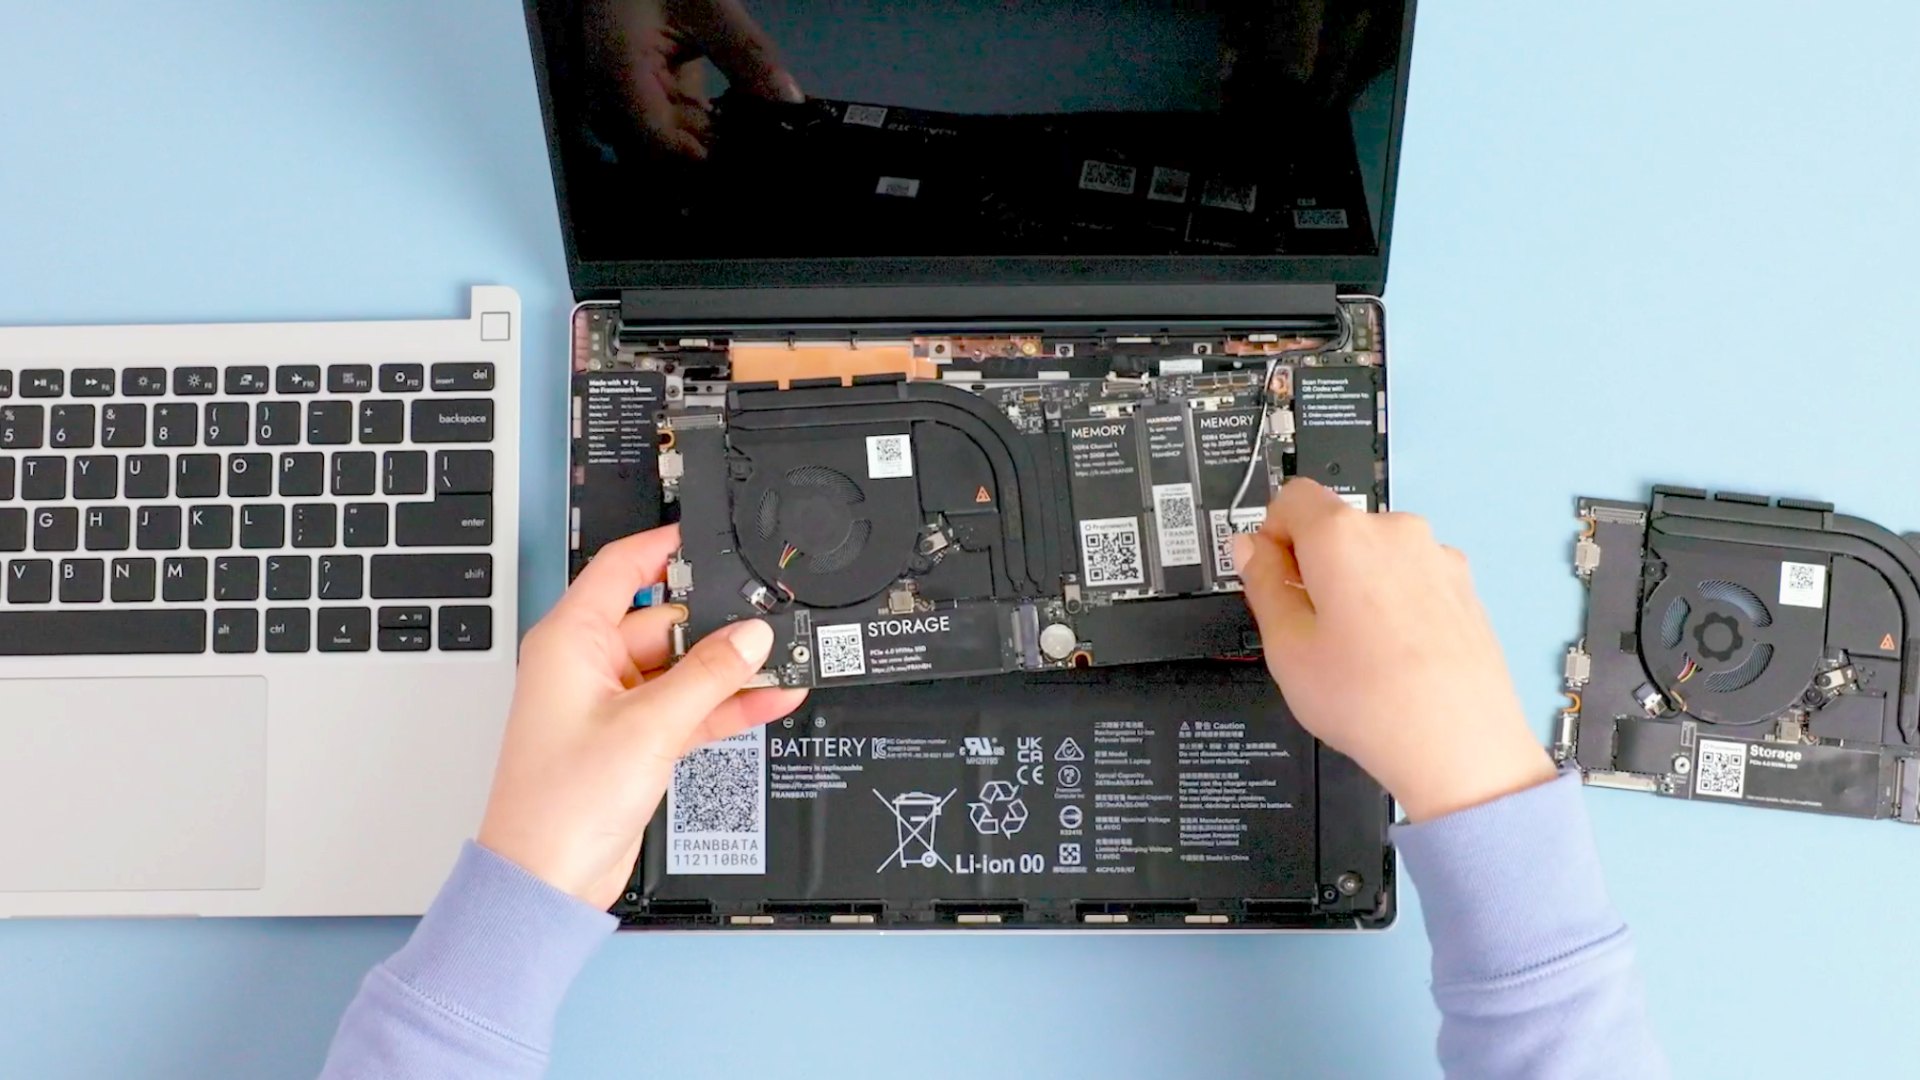 Inside a Modular Framework laptop with parts labeled